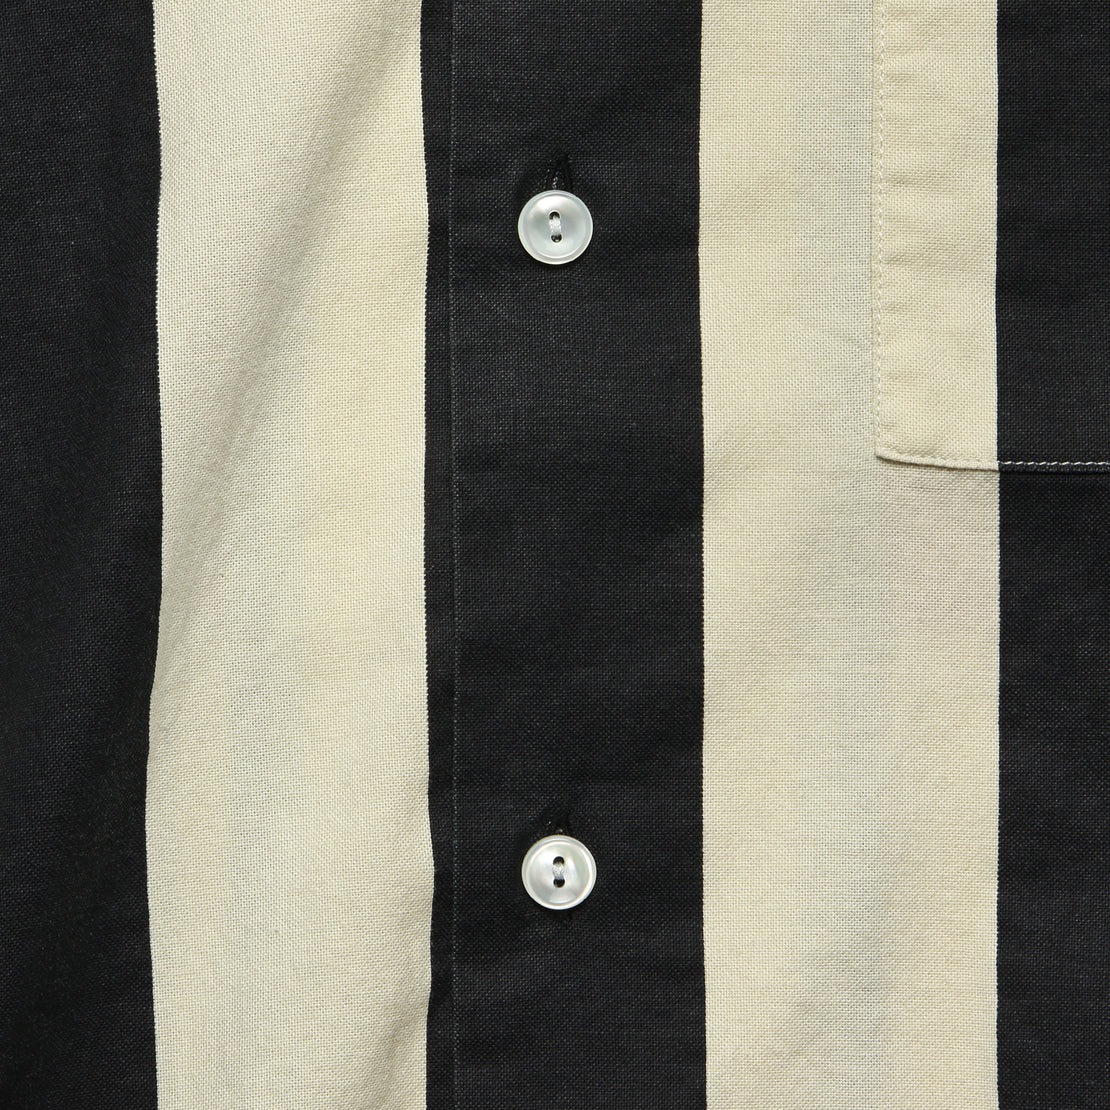 Soapbox Flag Shirt - Black/White - Levis Vintage Clothing - STAG Provisions - Tops - S/S Woven - Stripe